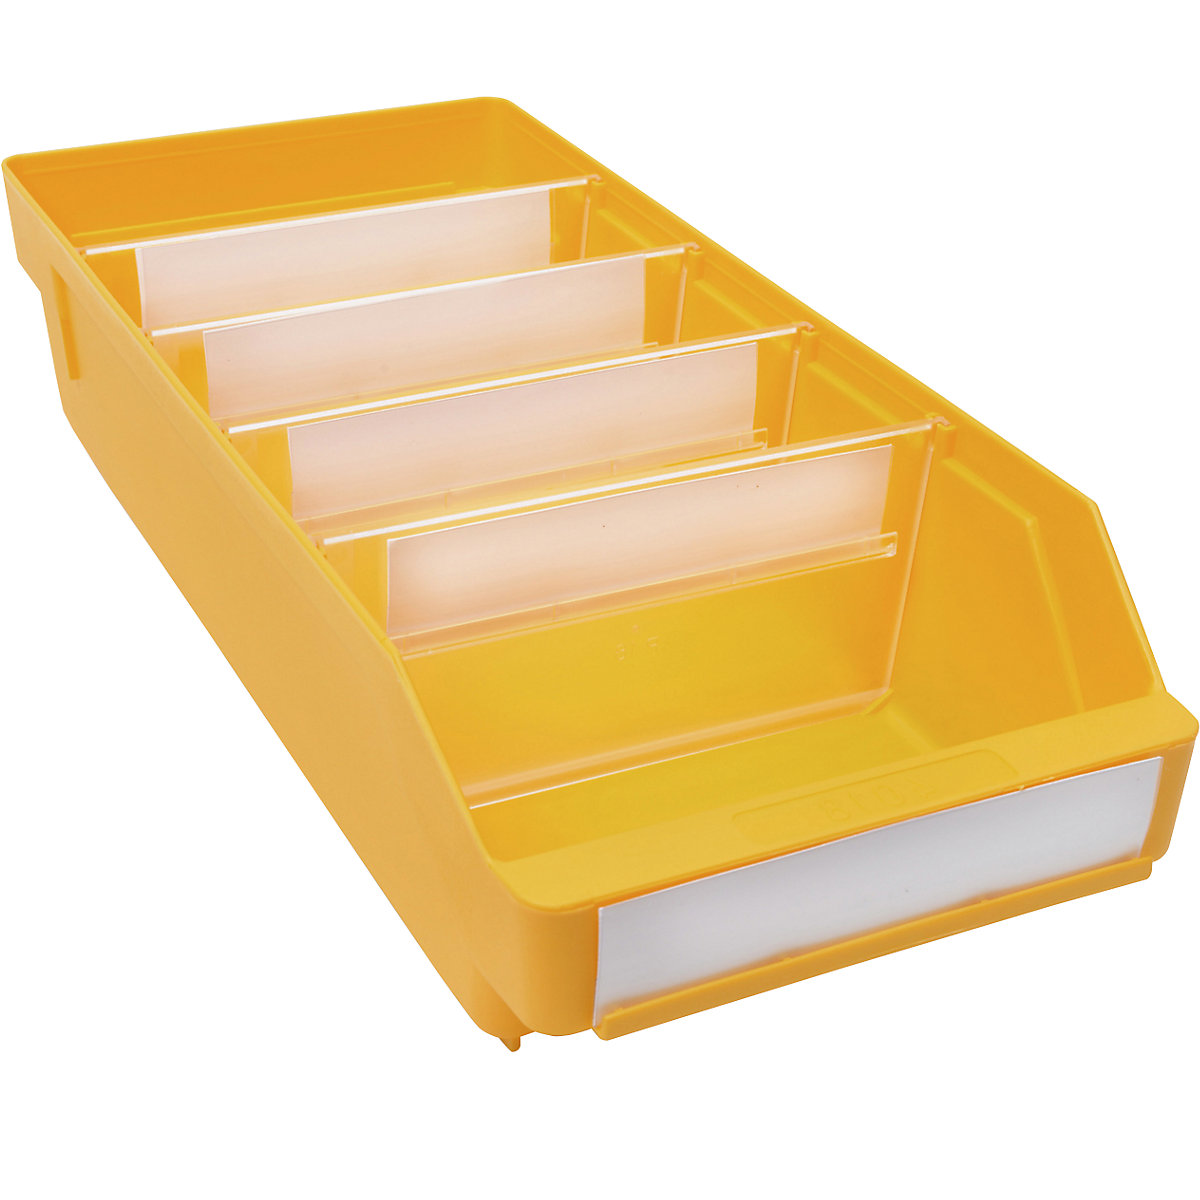 Shelf bin made of highly impact resistant polypropylene – STEMO, yellow, LxWxH 400 x 180 x 95 mm, pack of 20-16